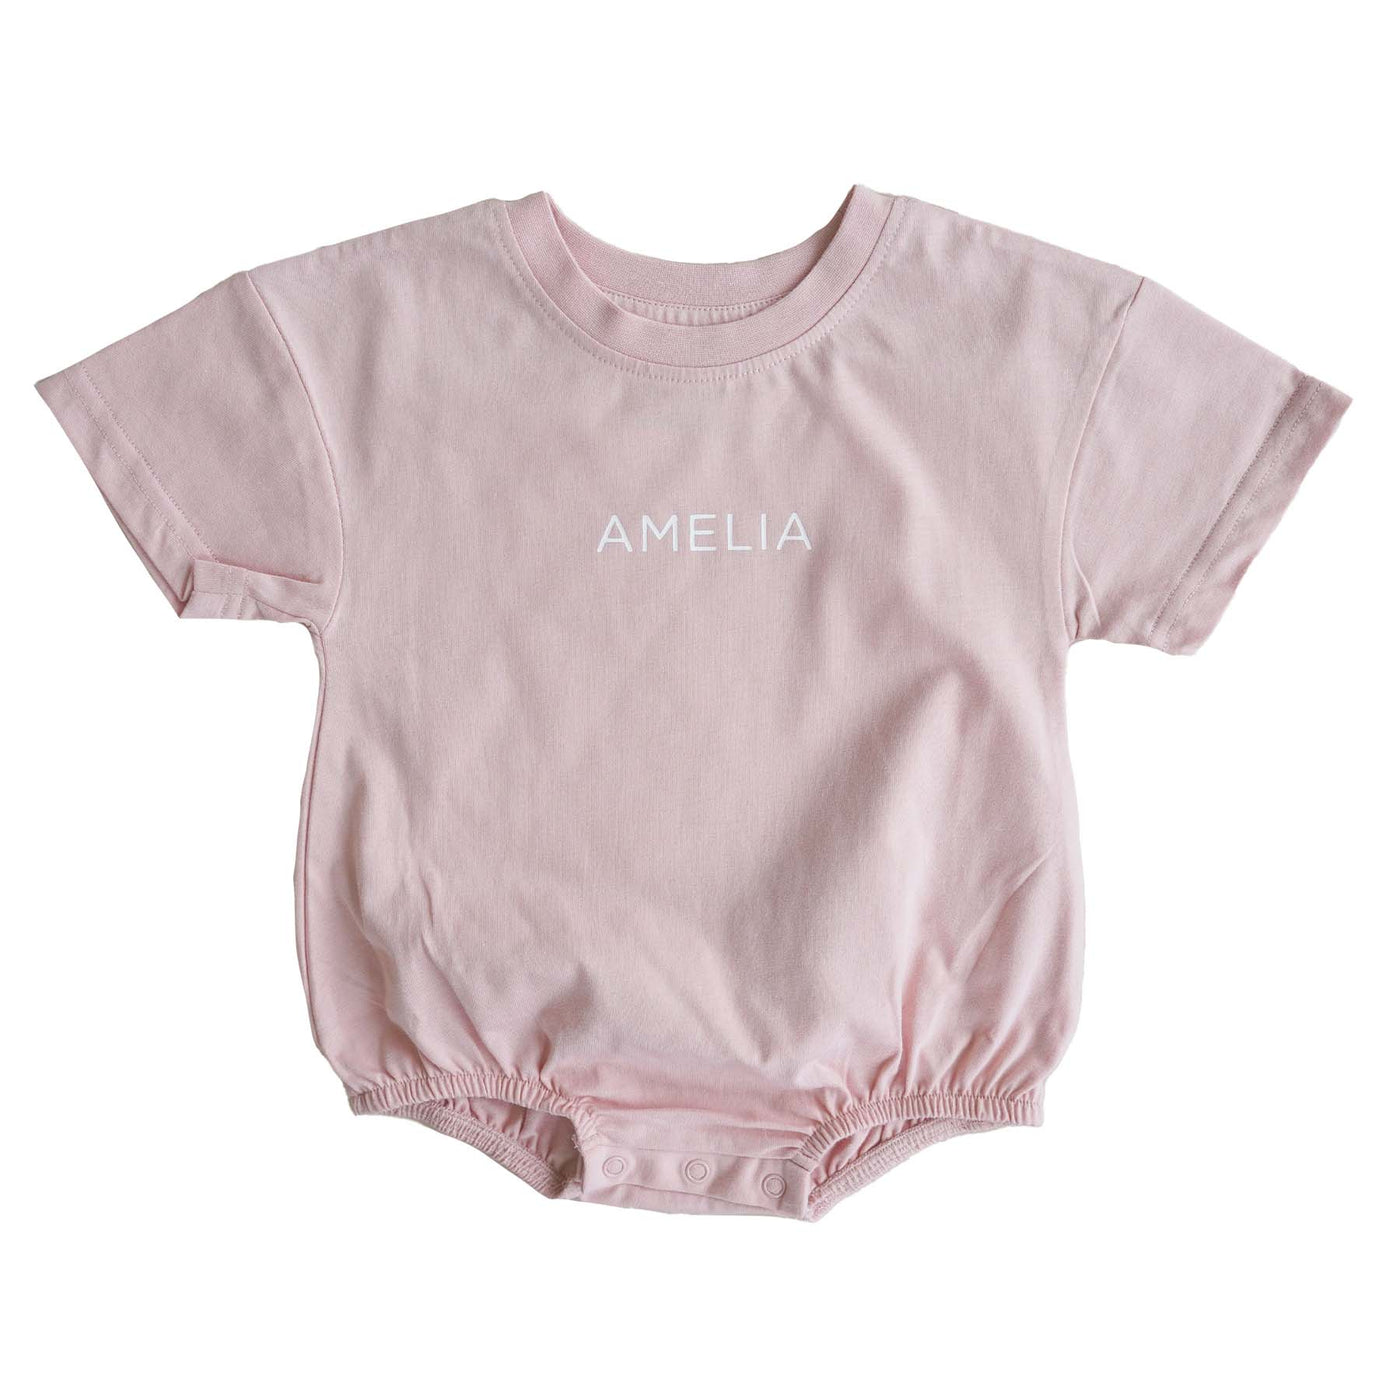 light pink personalized tshirt romper